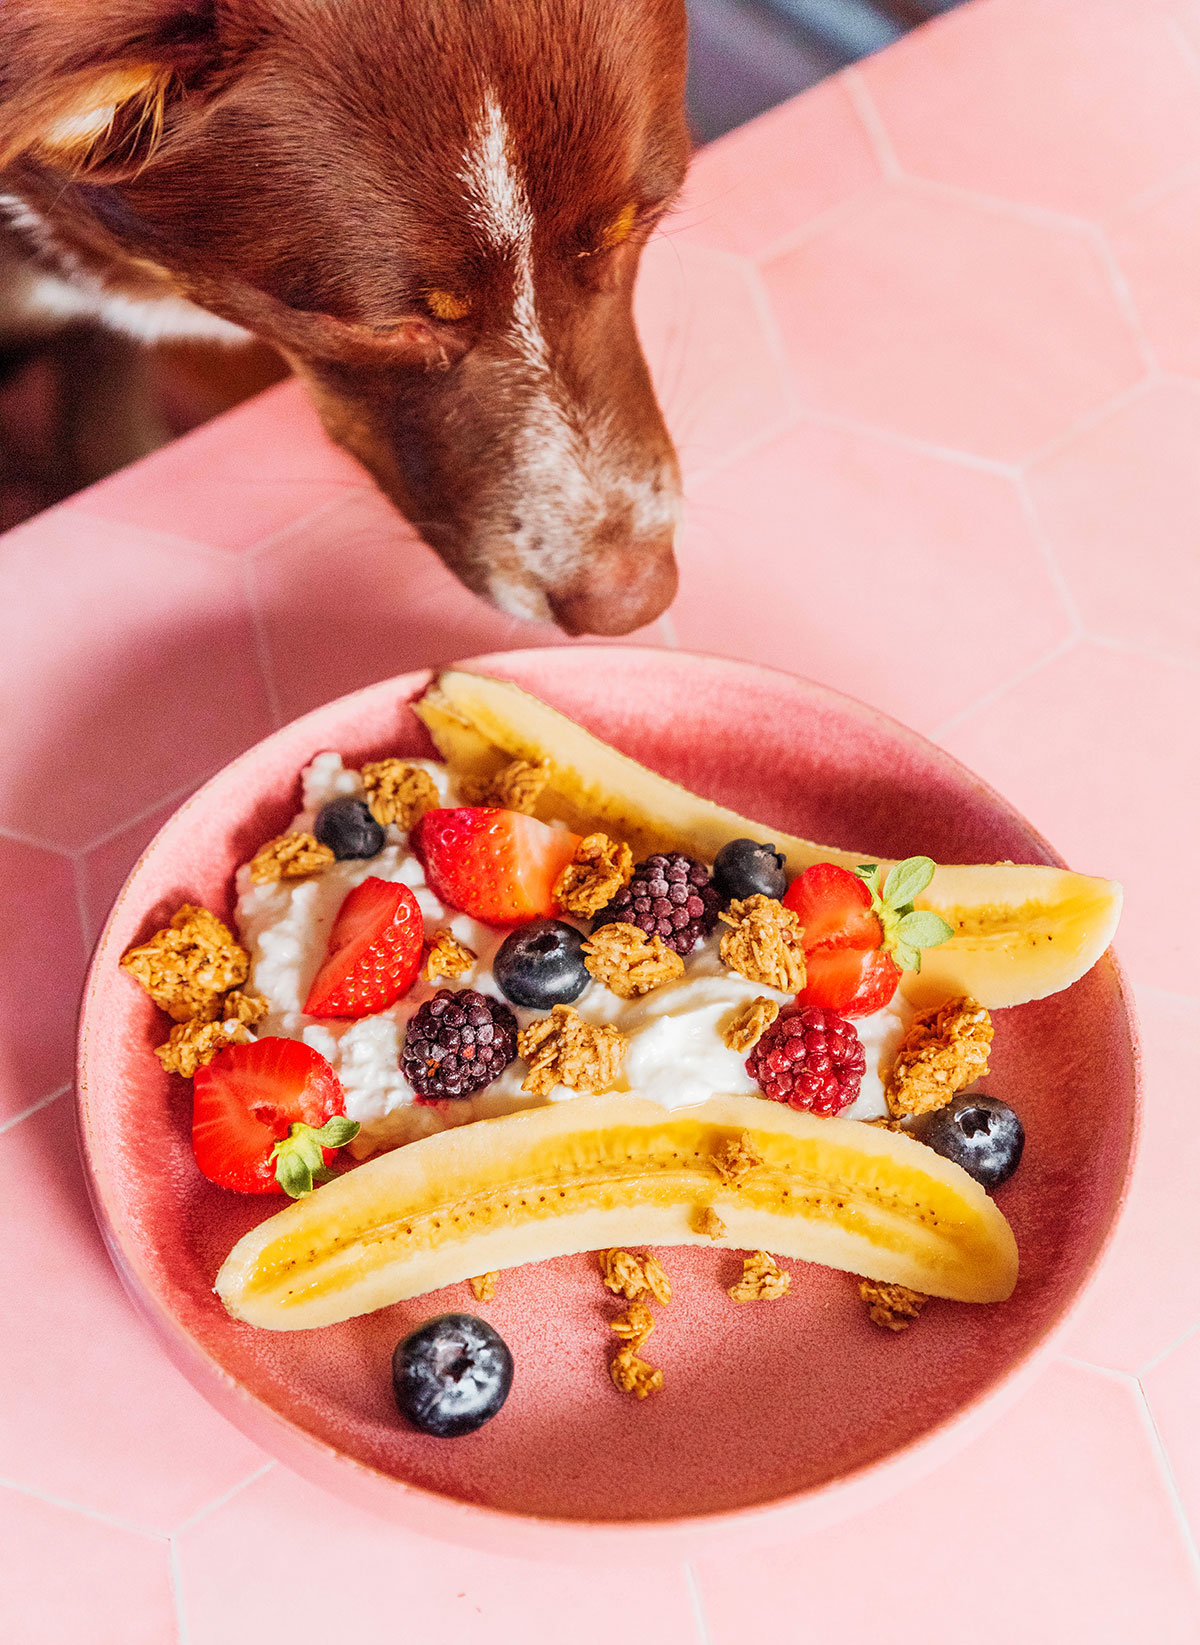 A brown dog eating a banana split out of a pink bowl